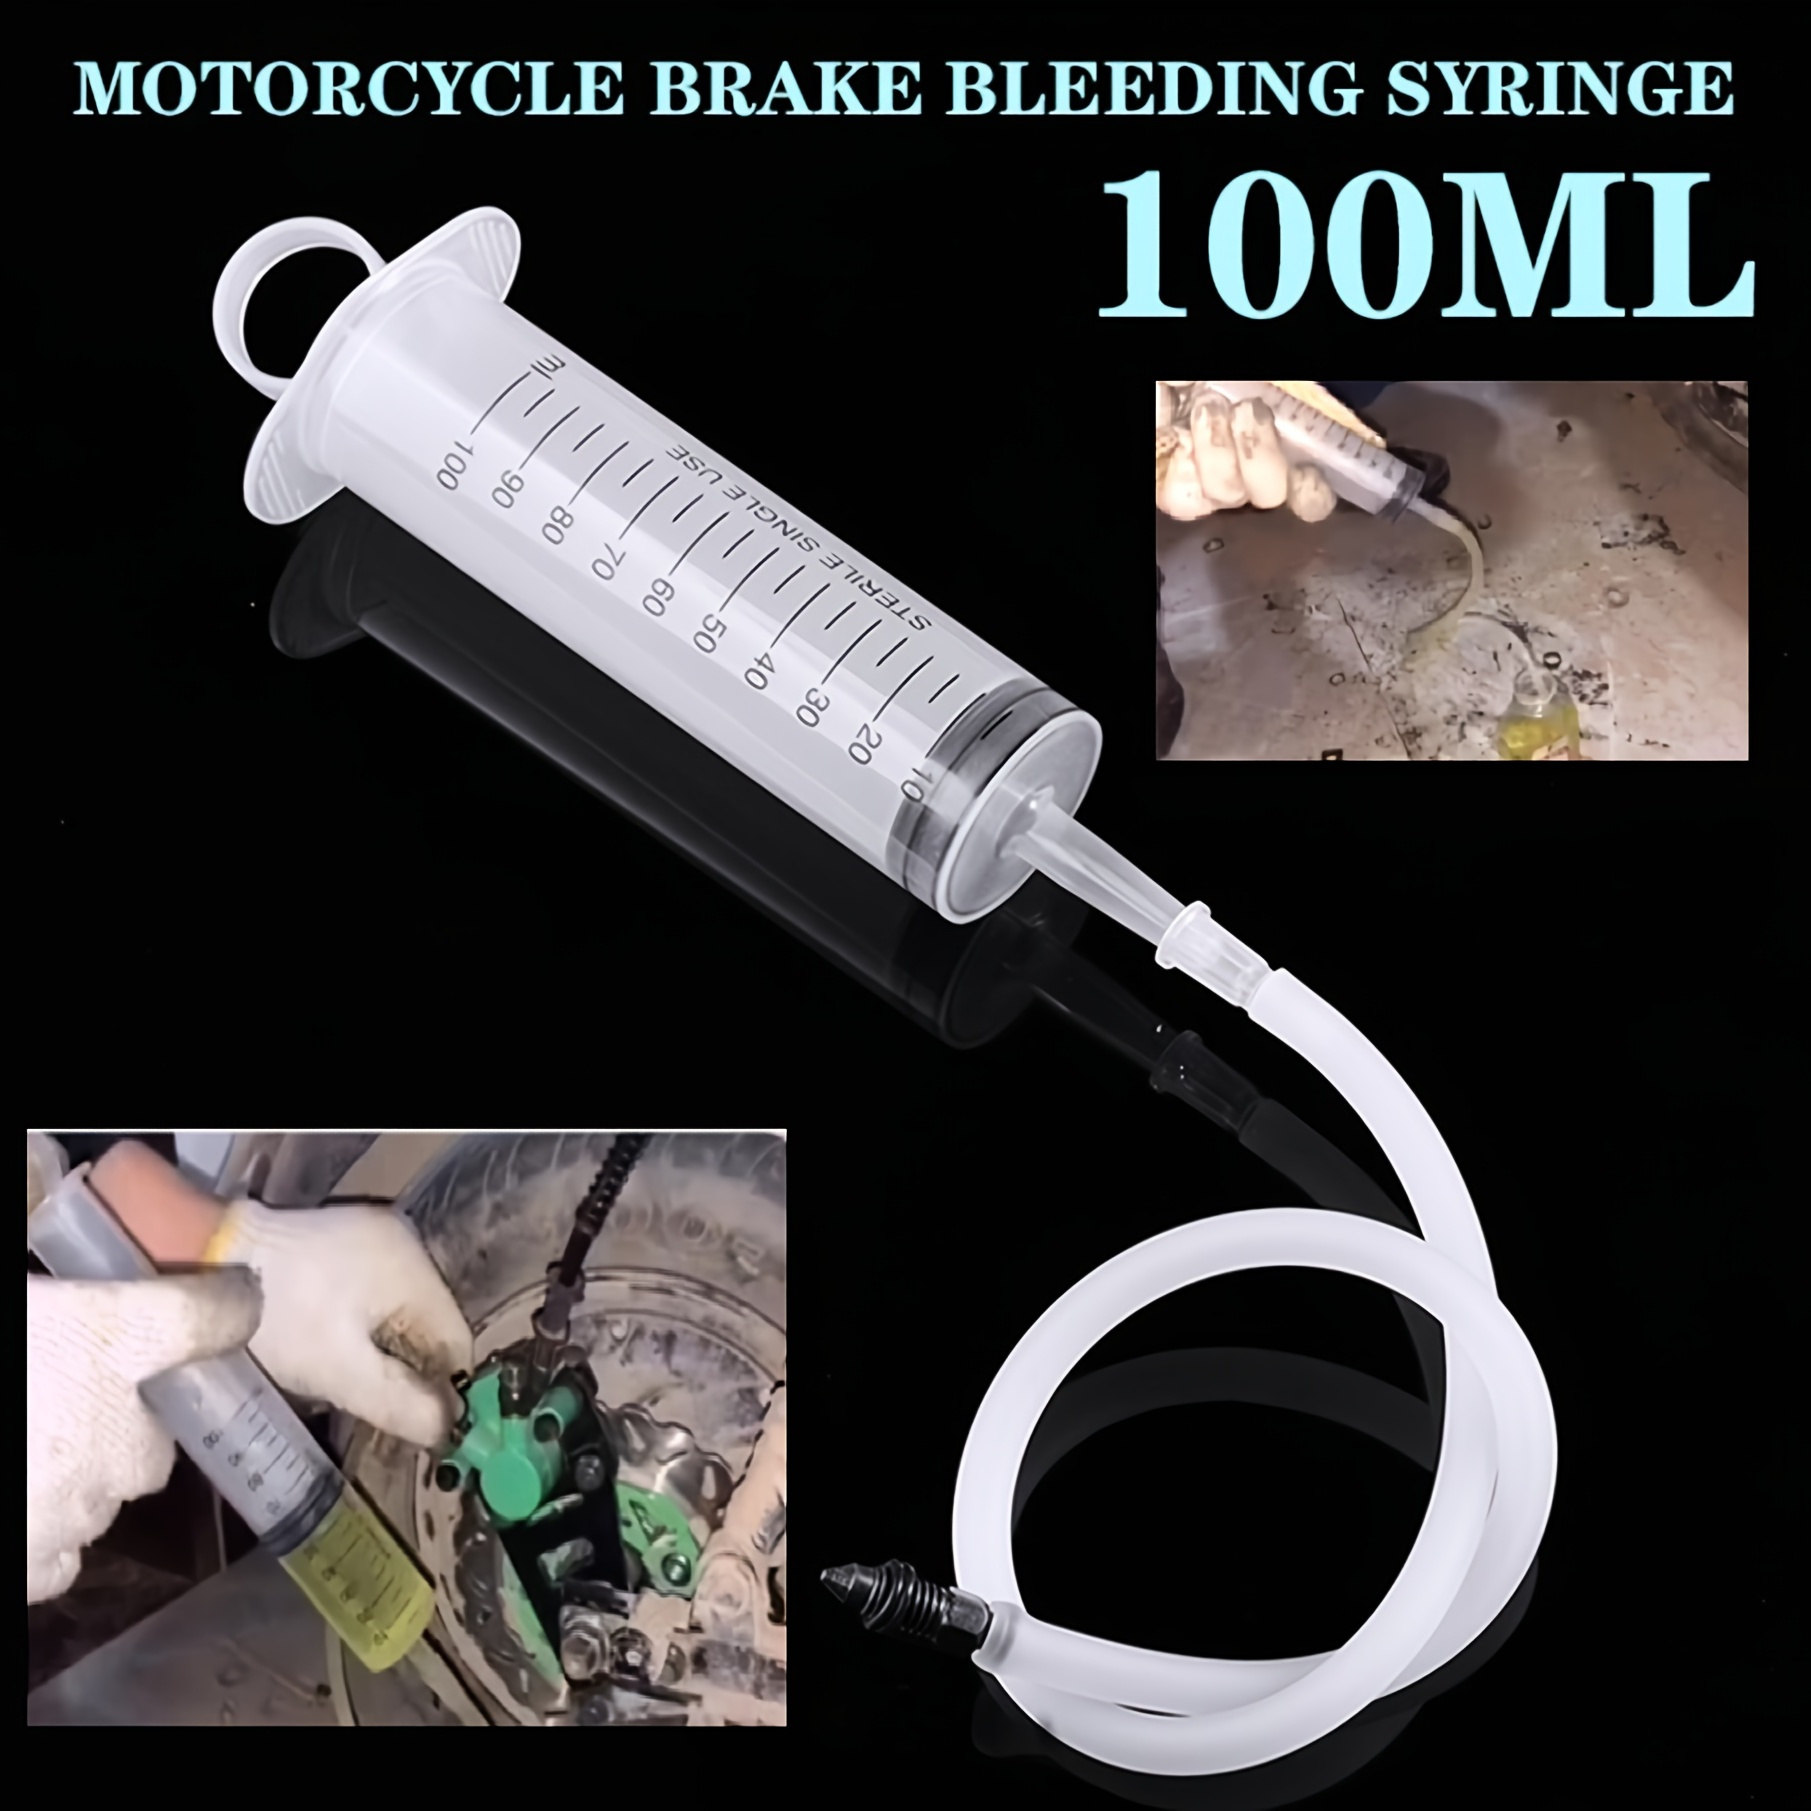 

100ml Motorcycle Hydraulic Disc Brake Bleed Kit - Bleed Brake Oil Easily & Quickly With This Professional Bleeder Tool Kit!